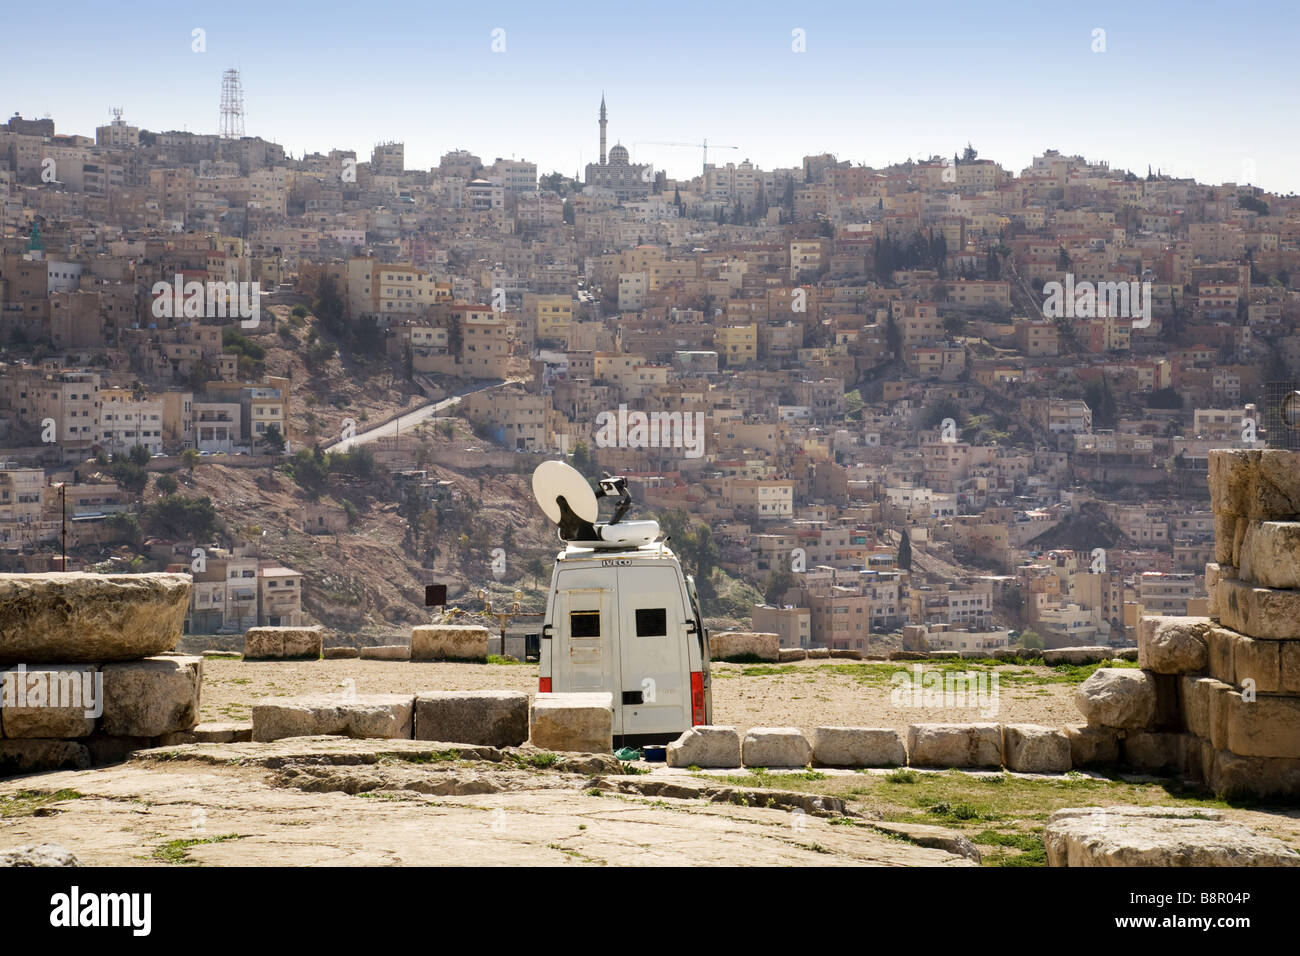 A modern TV van seen in the ancient Citadel of Amman, Jordan, with the city in the background Stock Photo